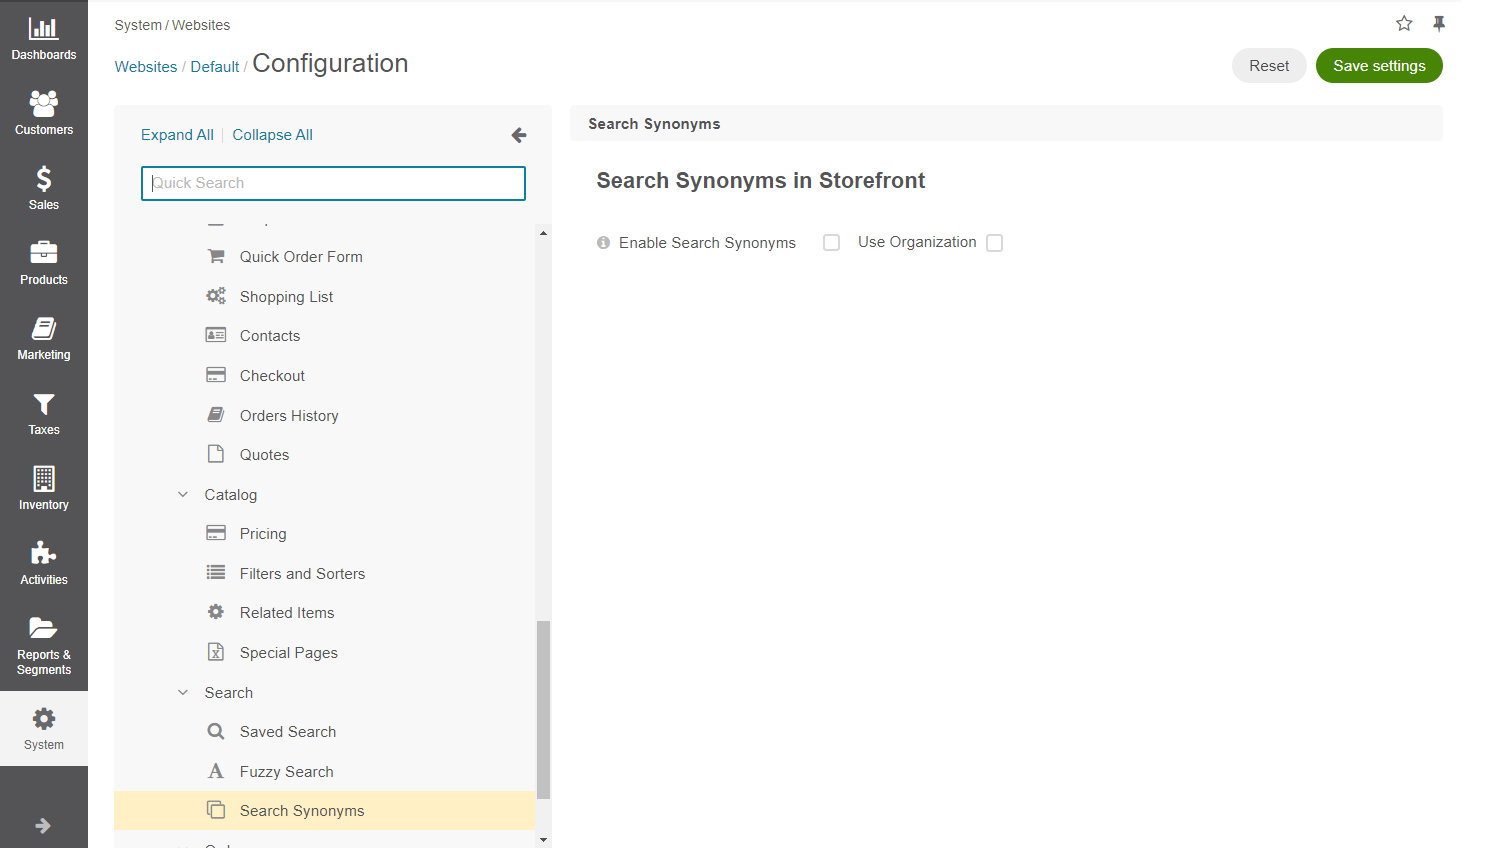 Configuration option on the website level to enable the use of synonyms in the storefront search